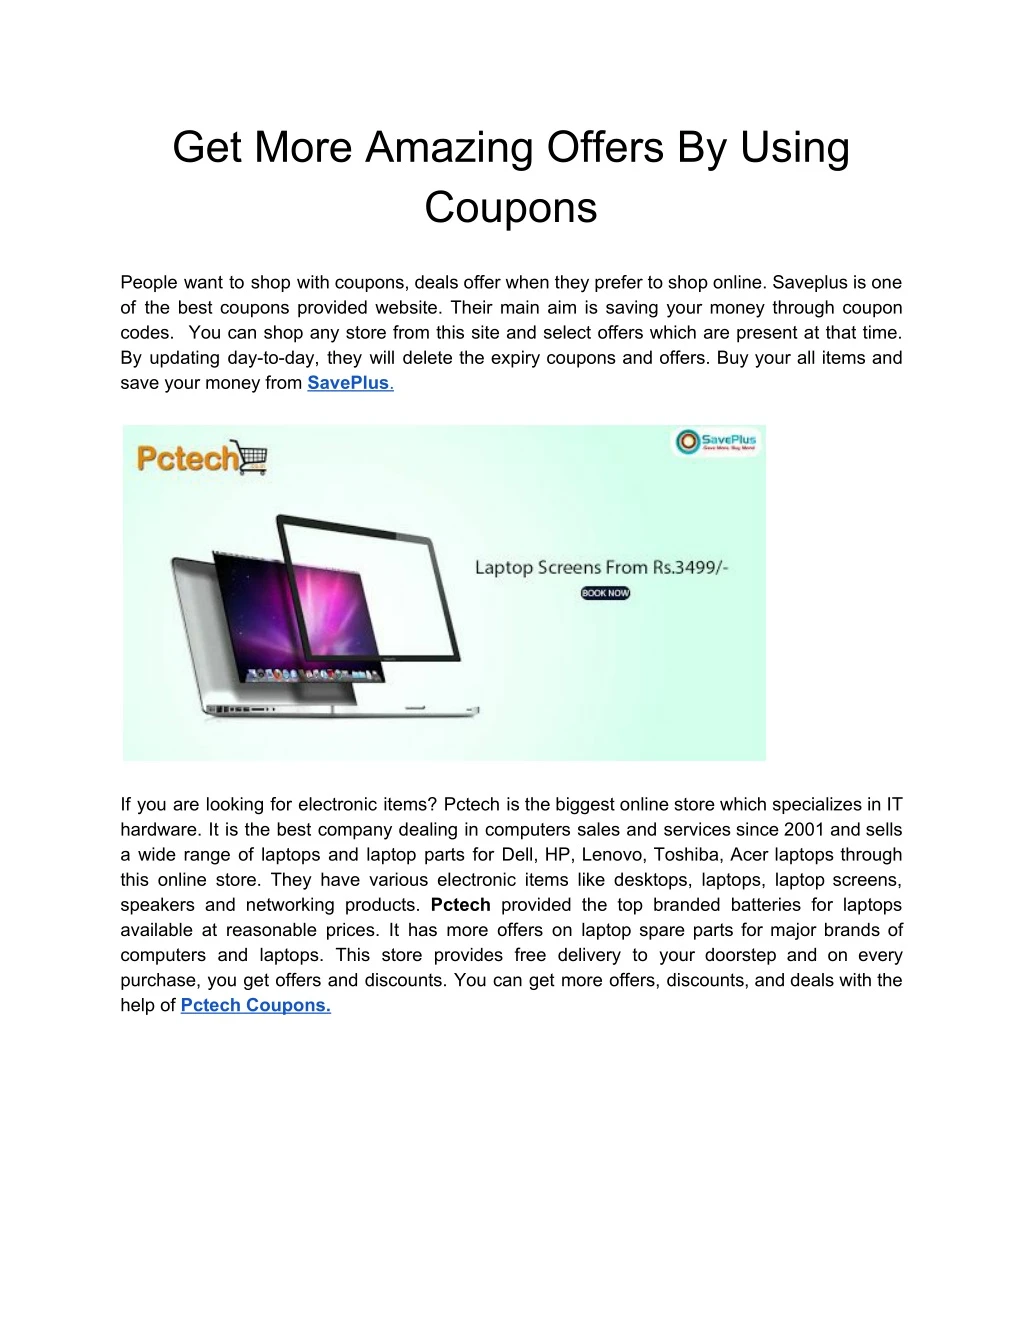 get more amazing offers by using coupons